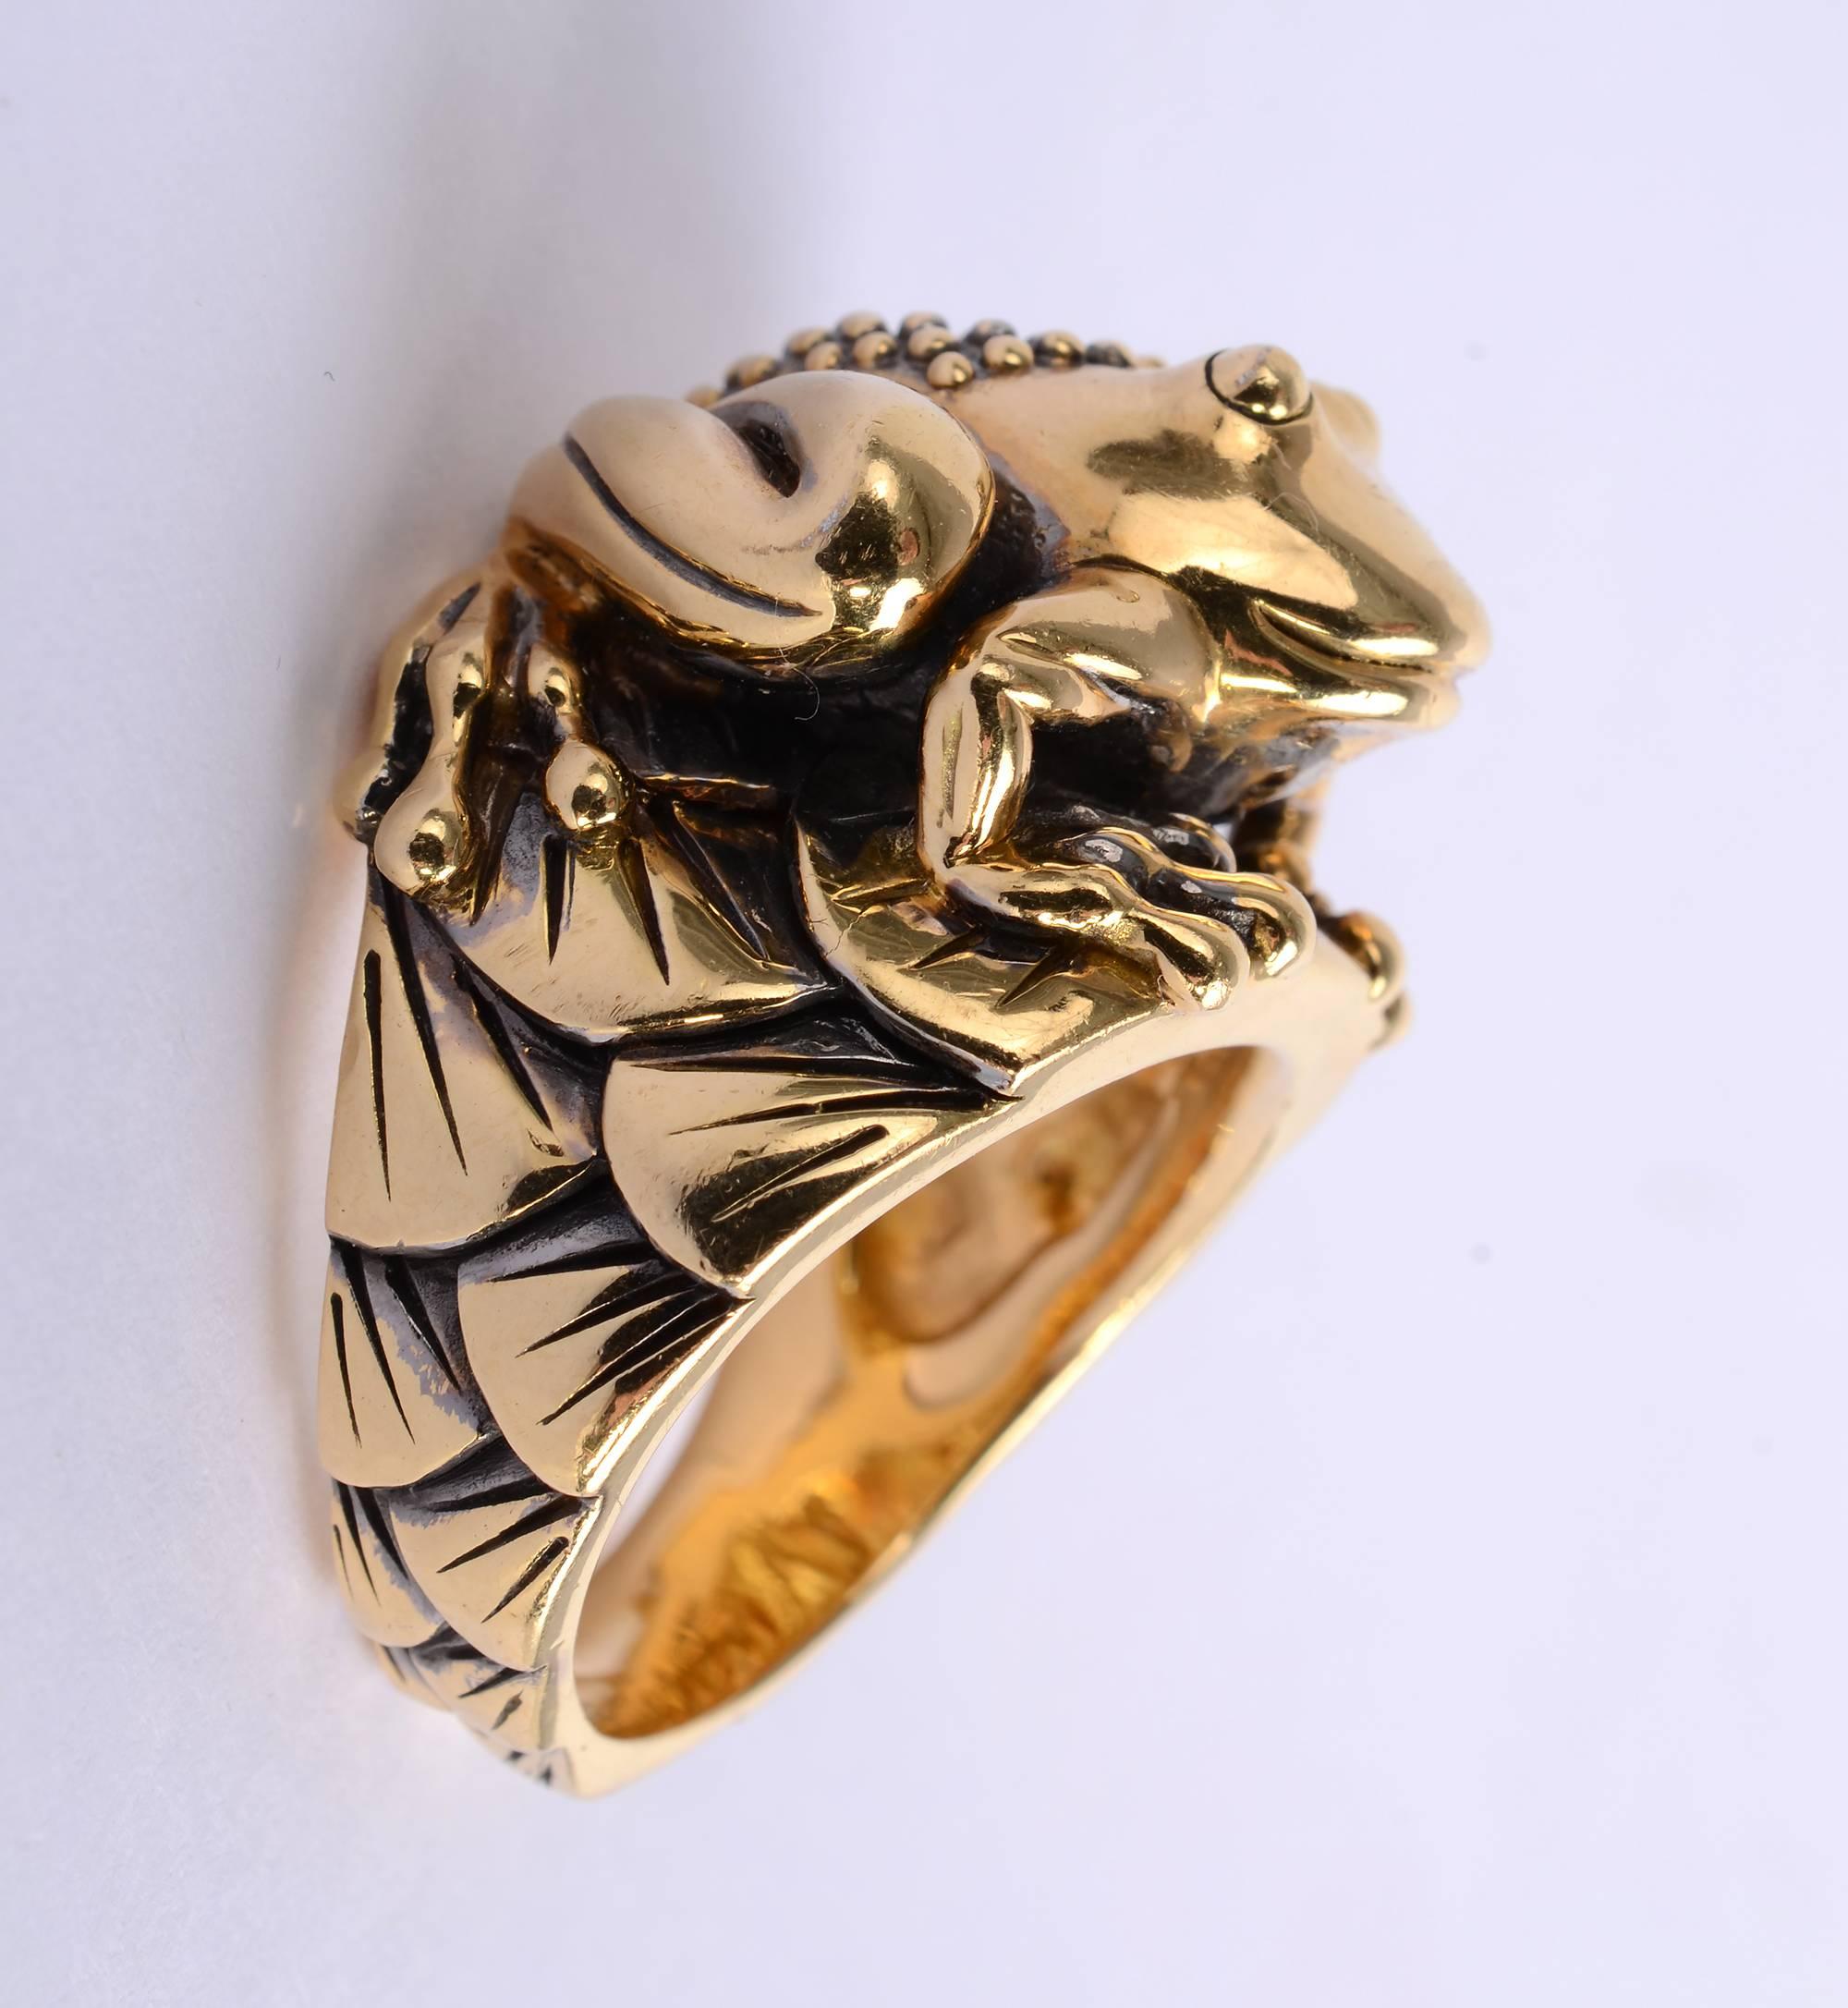 This charming, whimsical Frog Ring would serve well for anyone seeking his or her prince. The frog's back is beautifully textured with tiny balls. It is sitting on lily pads that continue throughout the band. The ring is size 8 1/2. It can be sized